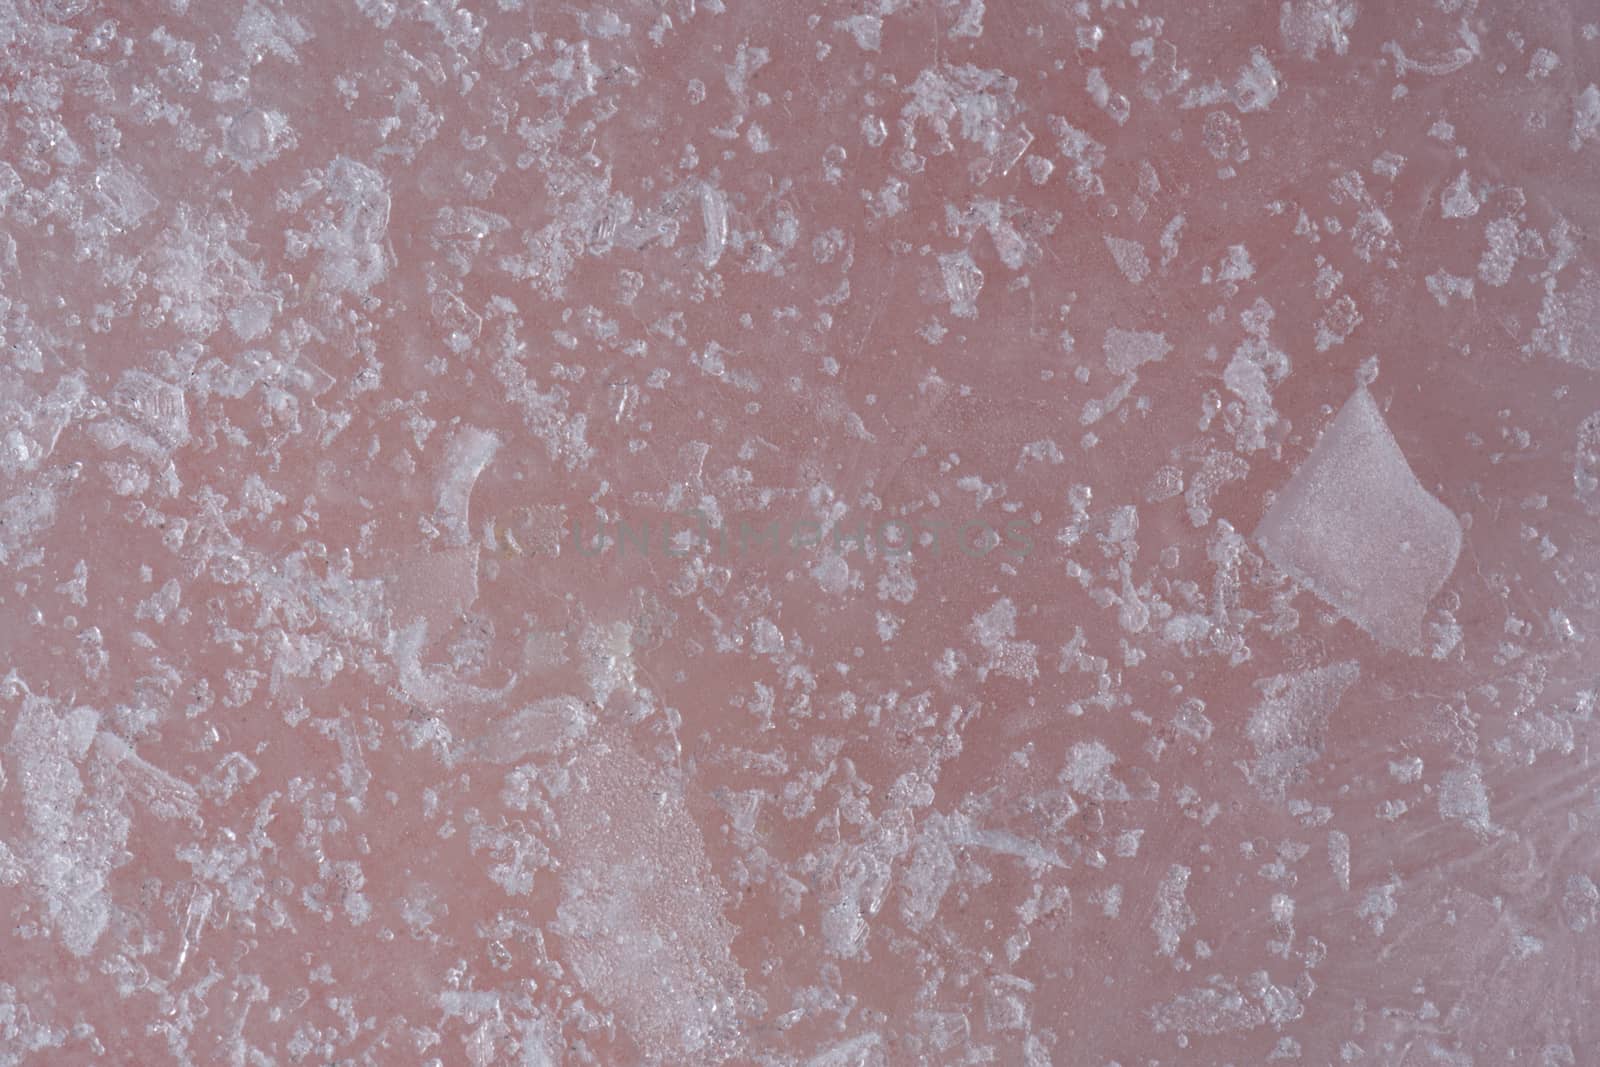 Icy pink surface, abstract image